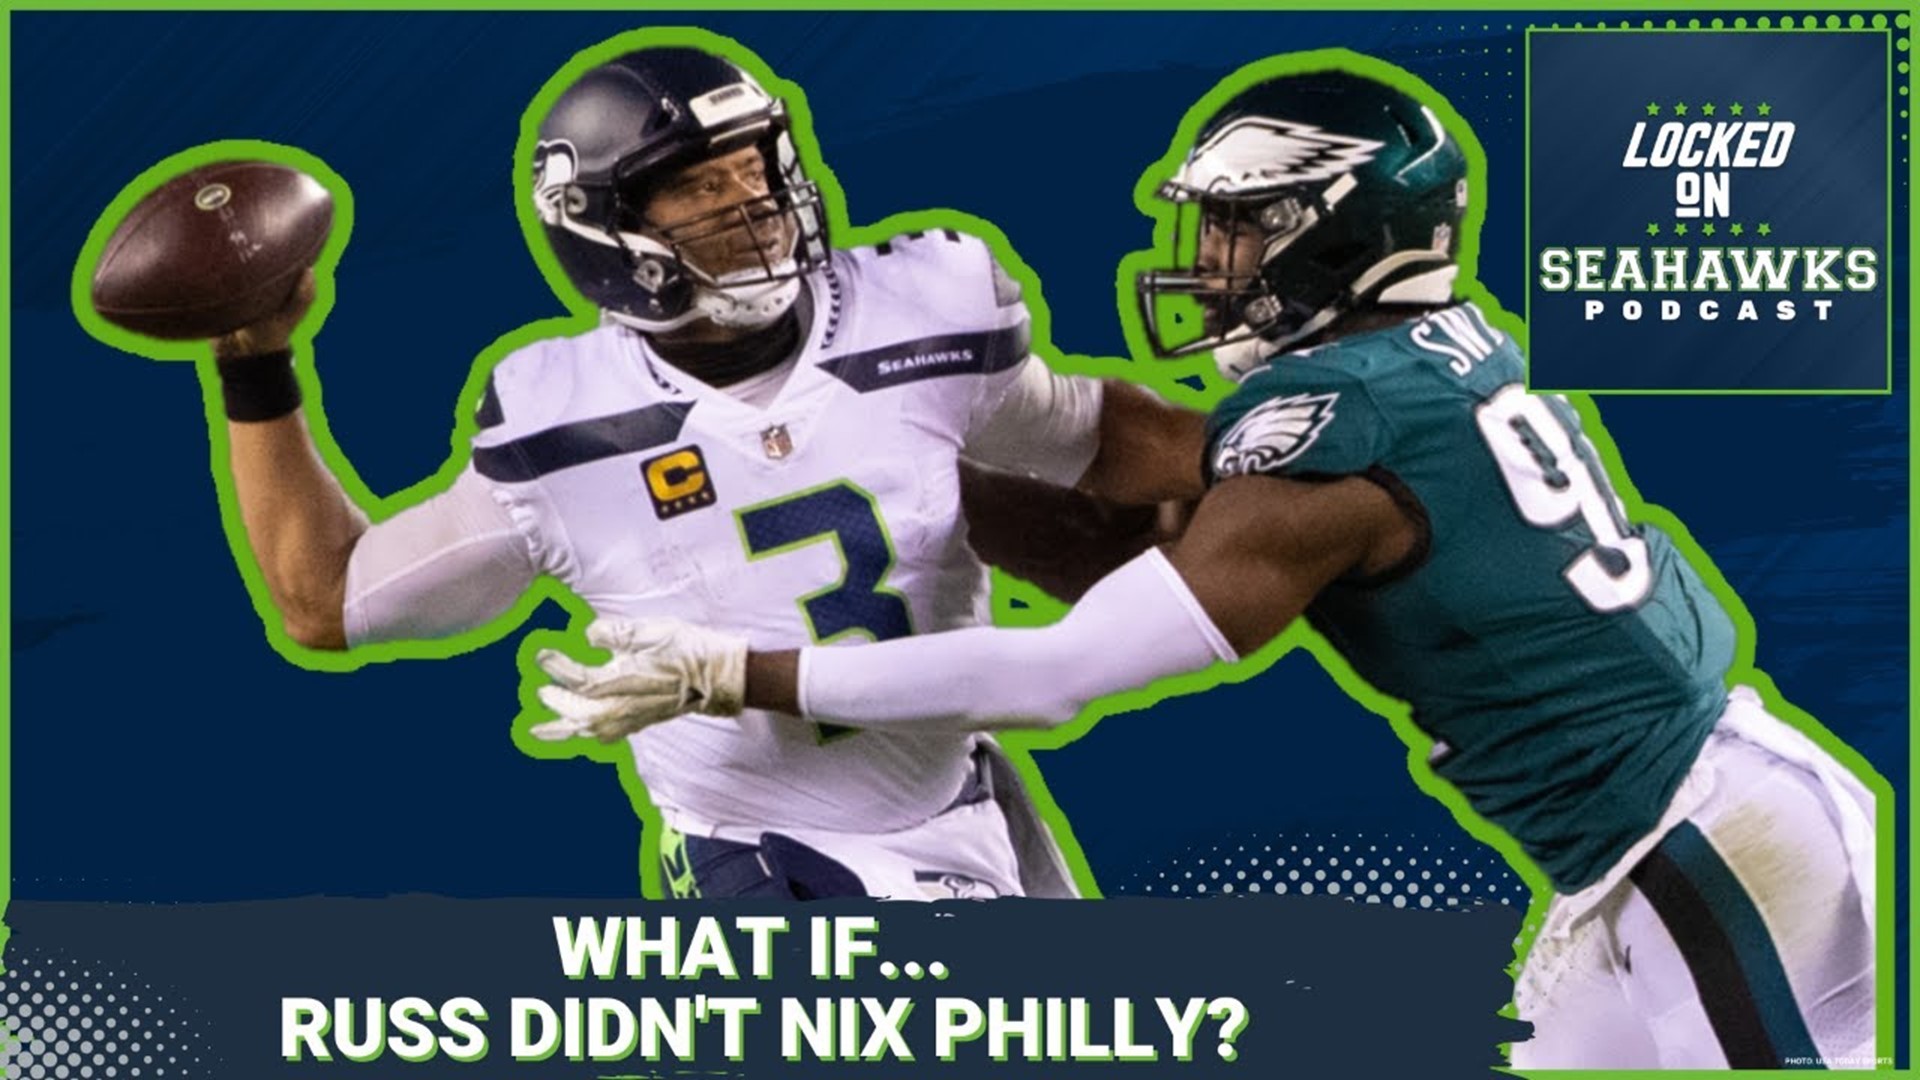 Last season, the Seahawks found immediate success after the departure of Russell Wilson, who was dealt to the Broncos, but what if he was sent to Philly instead?